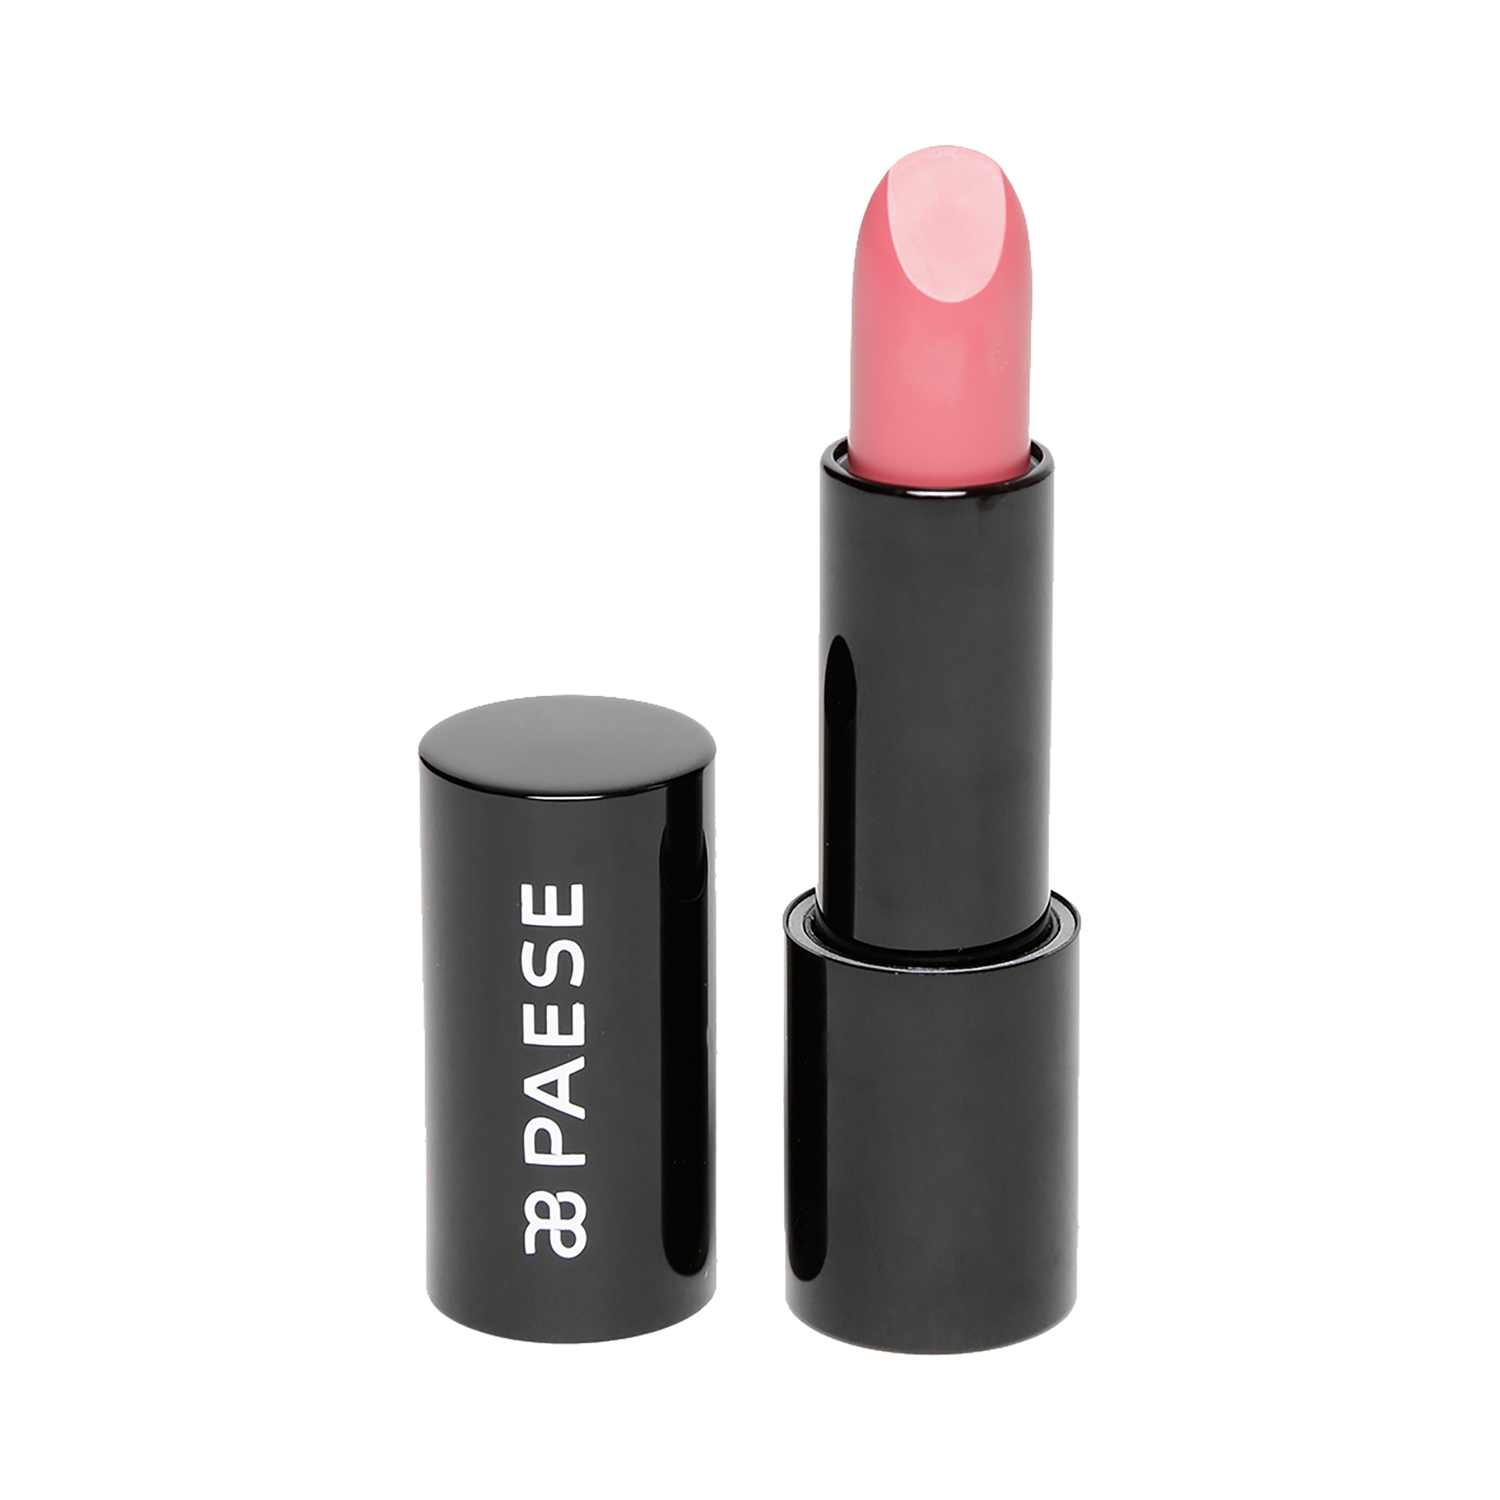 Paese Cosmetics Lipstick with Argan Oil - 24 Shade (4.3g)